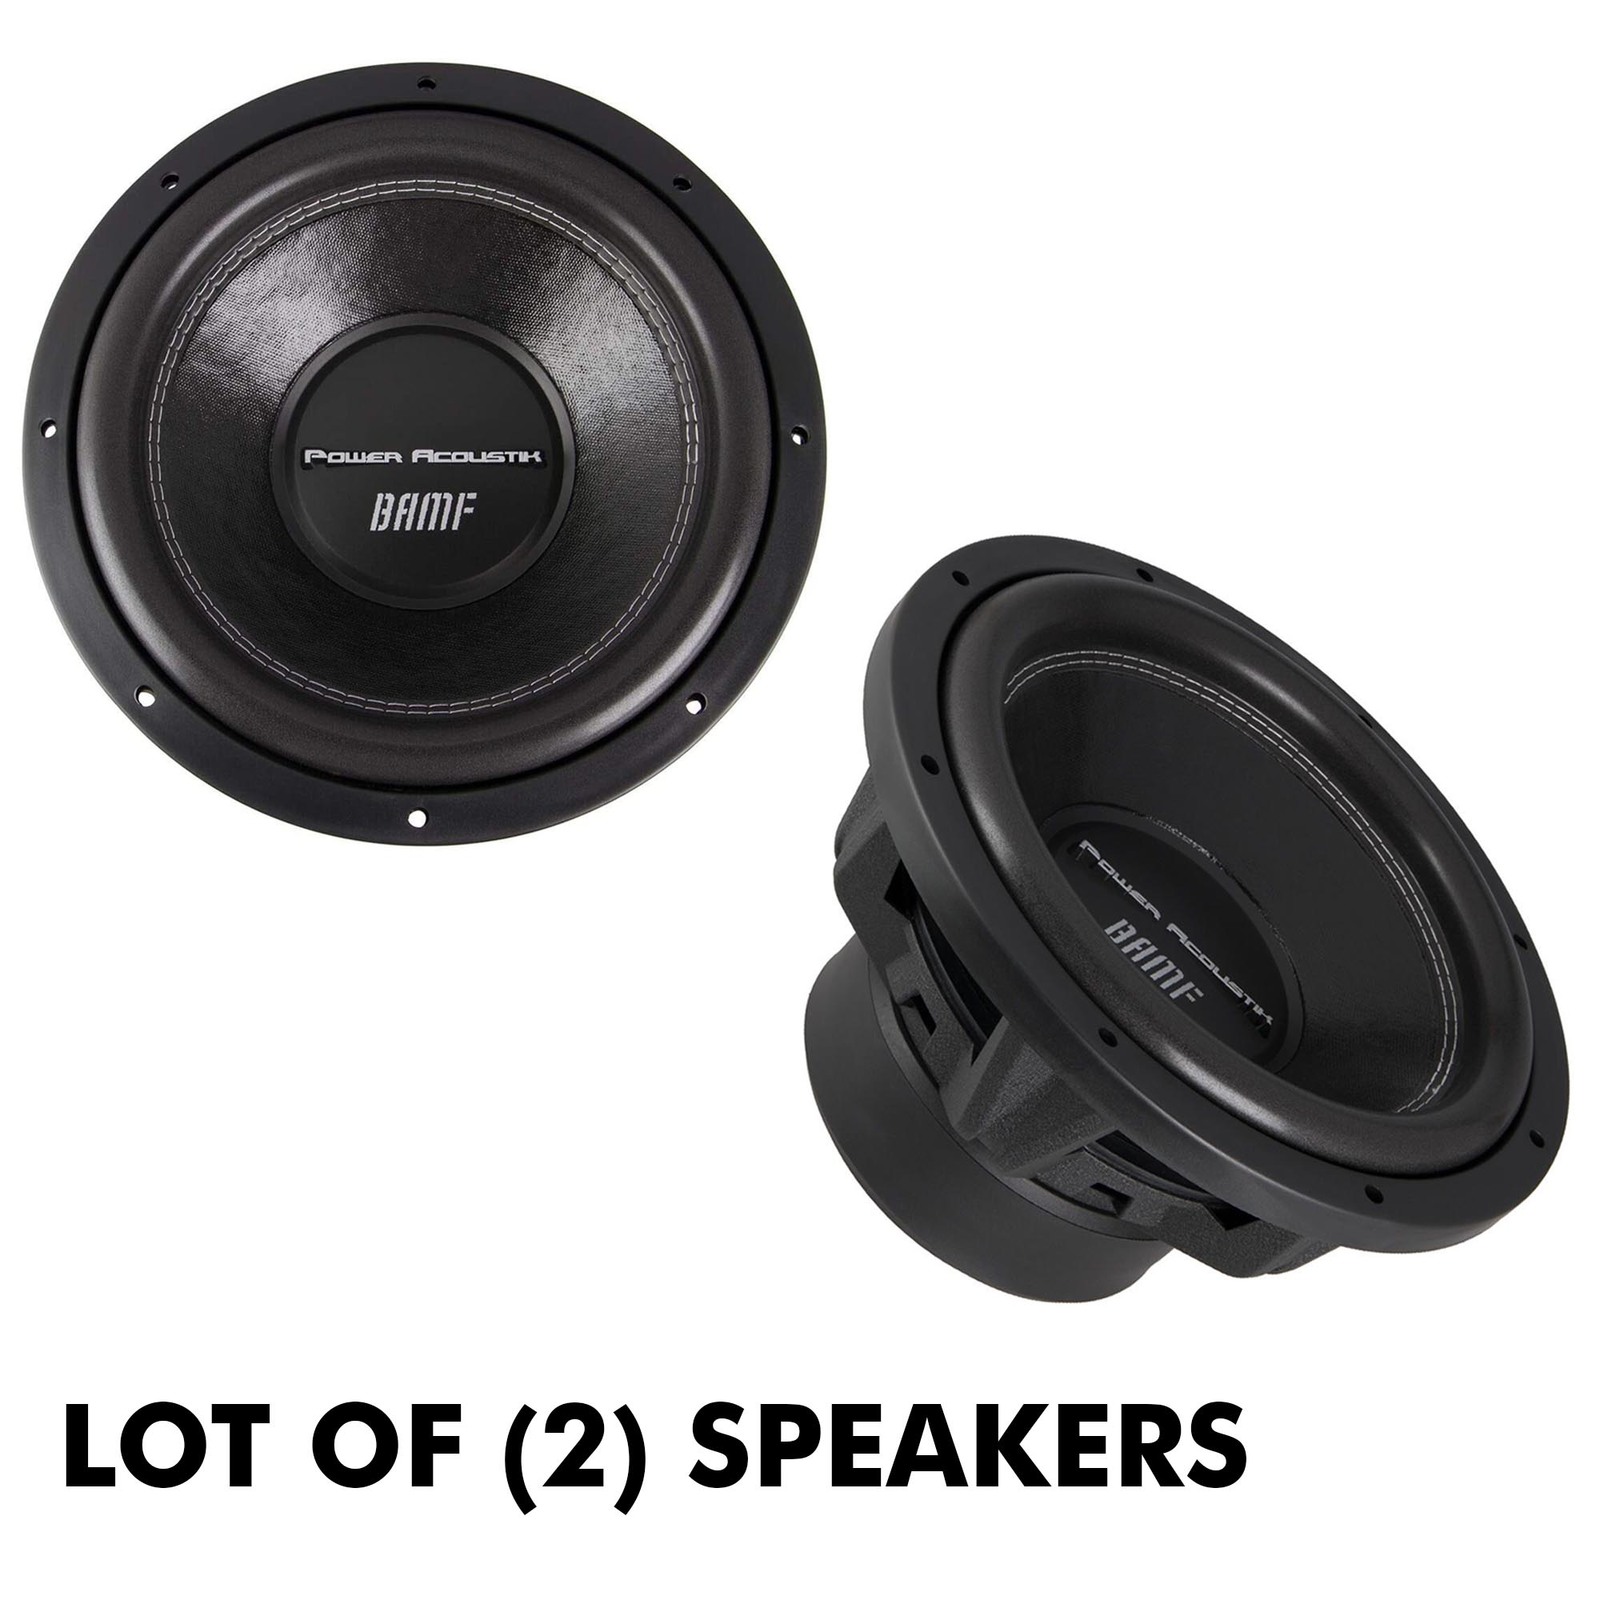 Power Acoustik 12 Sub Woofer Dual 4 ohm 3500 Watts Max, SOLD IN PAIRS